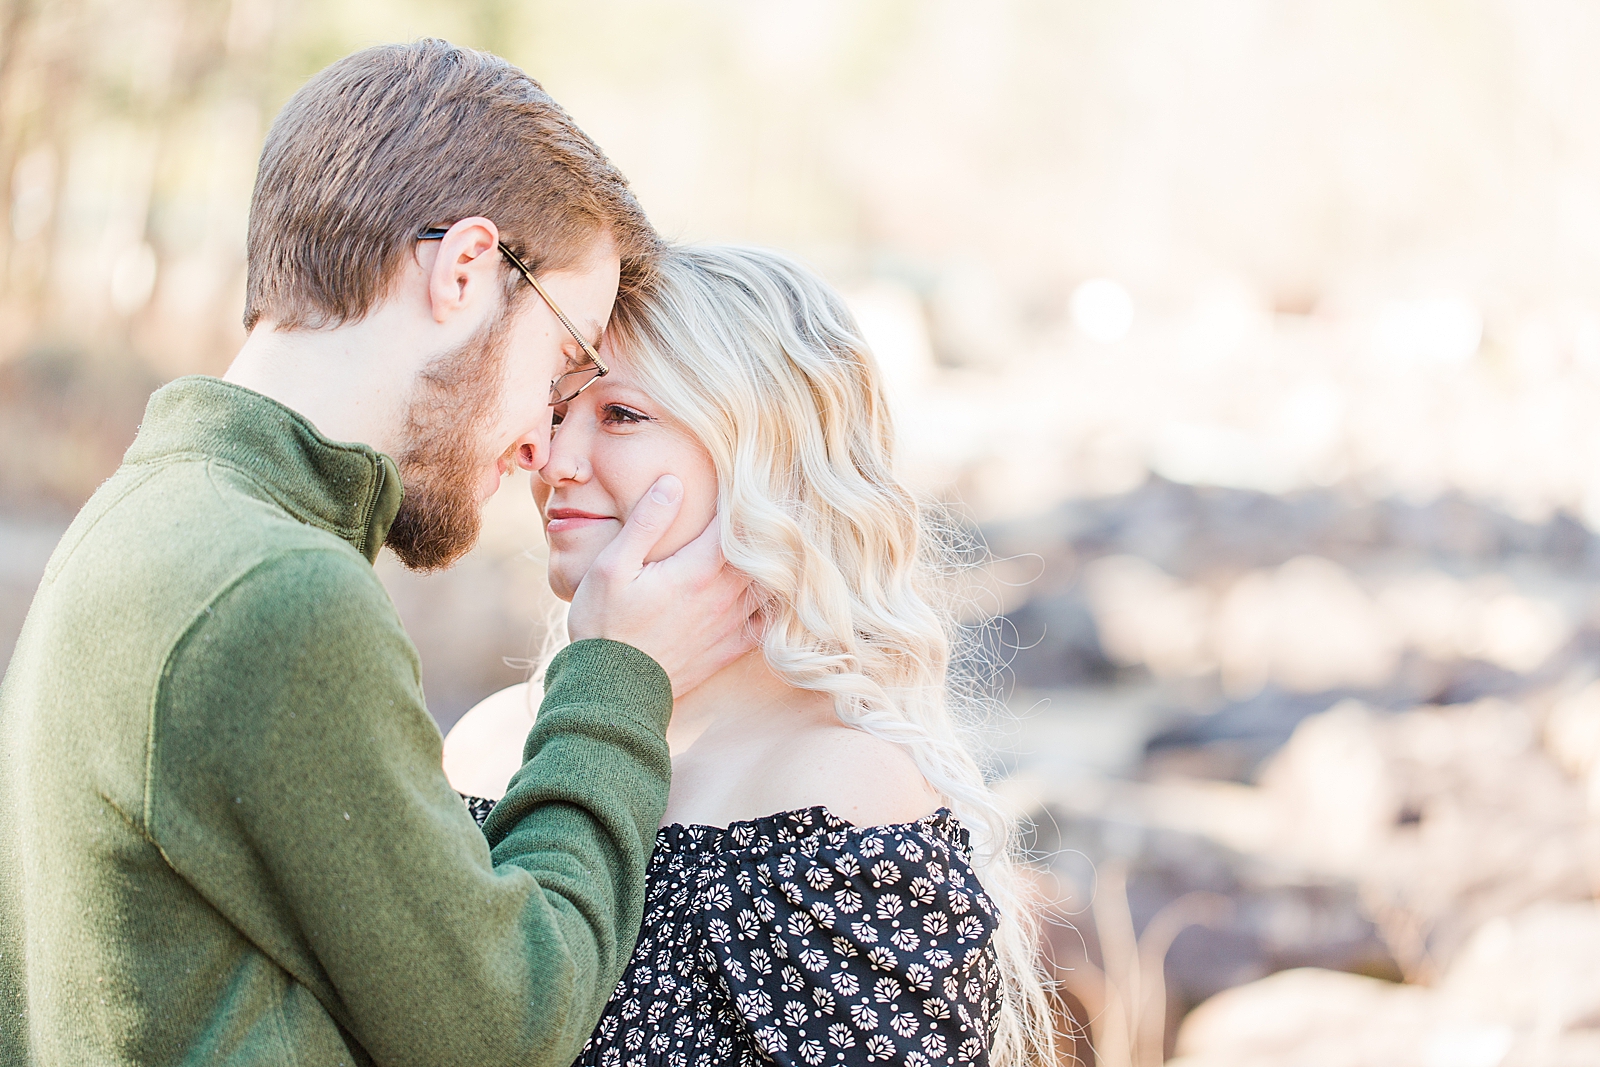 Ocoee River Engagement Session Cody and Haley nose to nose smiling at each other Photo